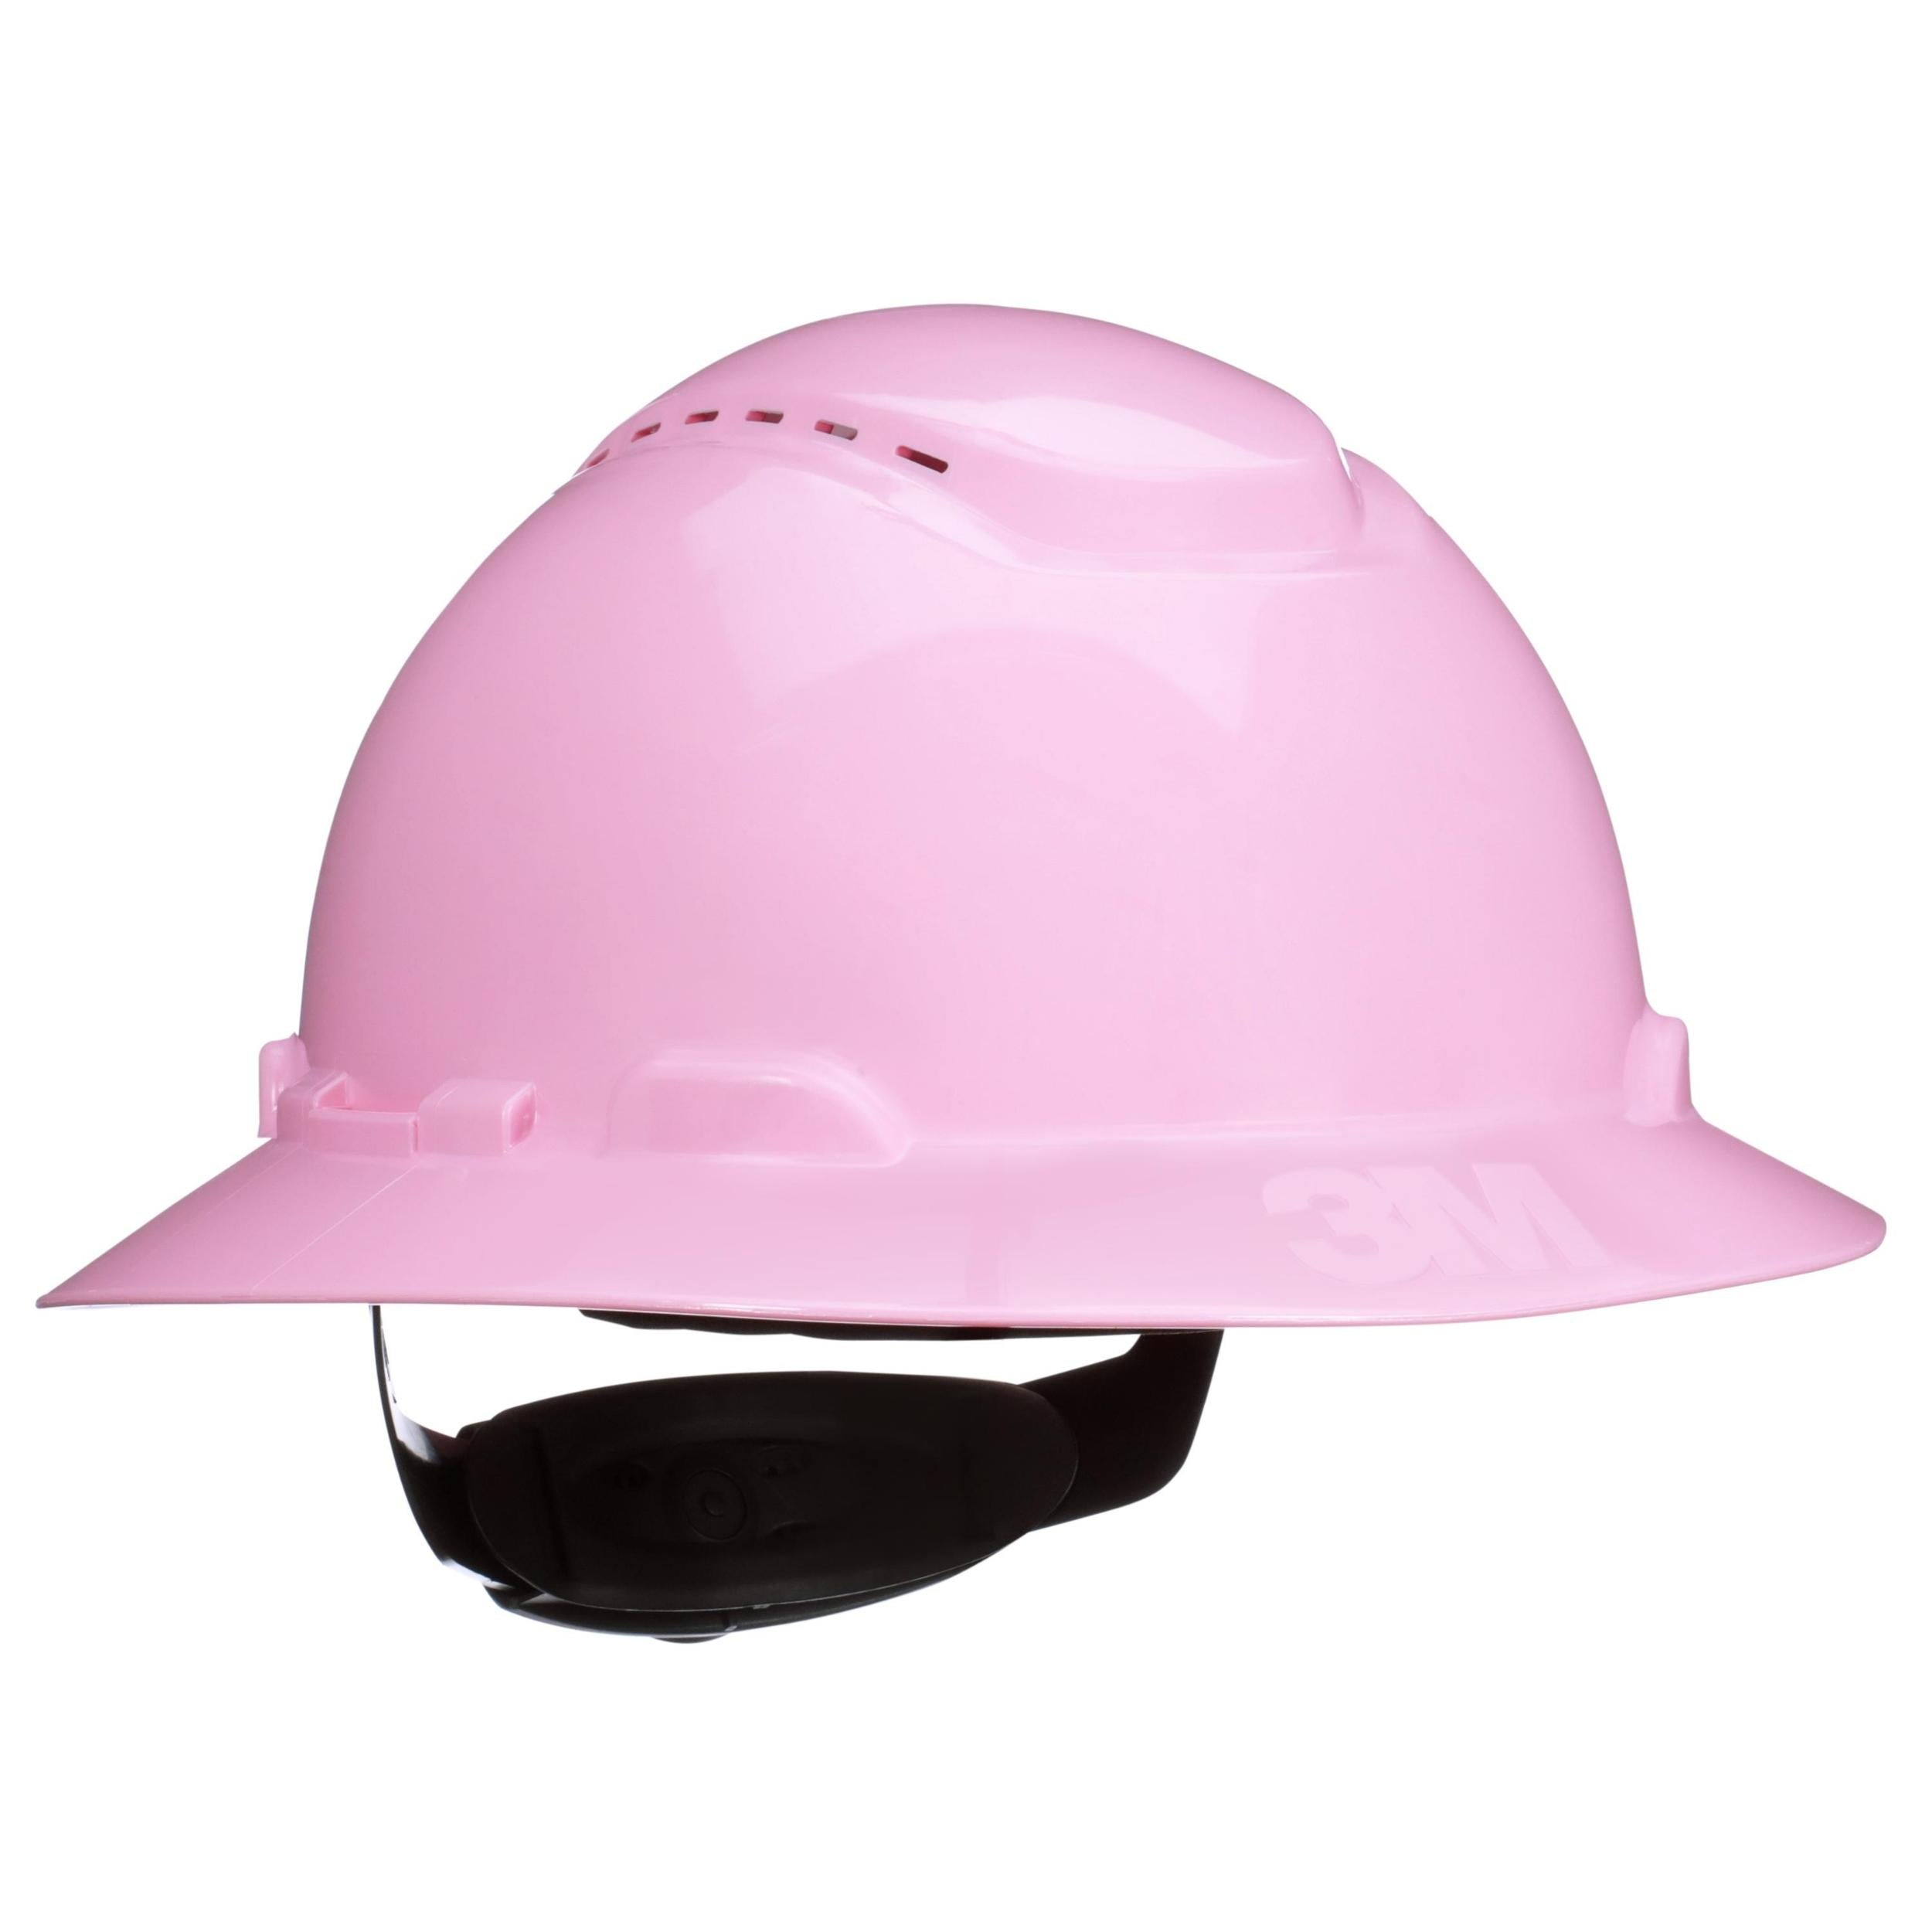 3M™ SecureFit™ Full Brim Hard Hat H-813SFV-UV, Pink, Vented, 4-Point Pressure Diffusion Ratchet Suspension, with UVicator